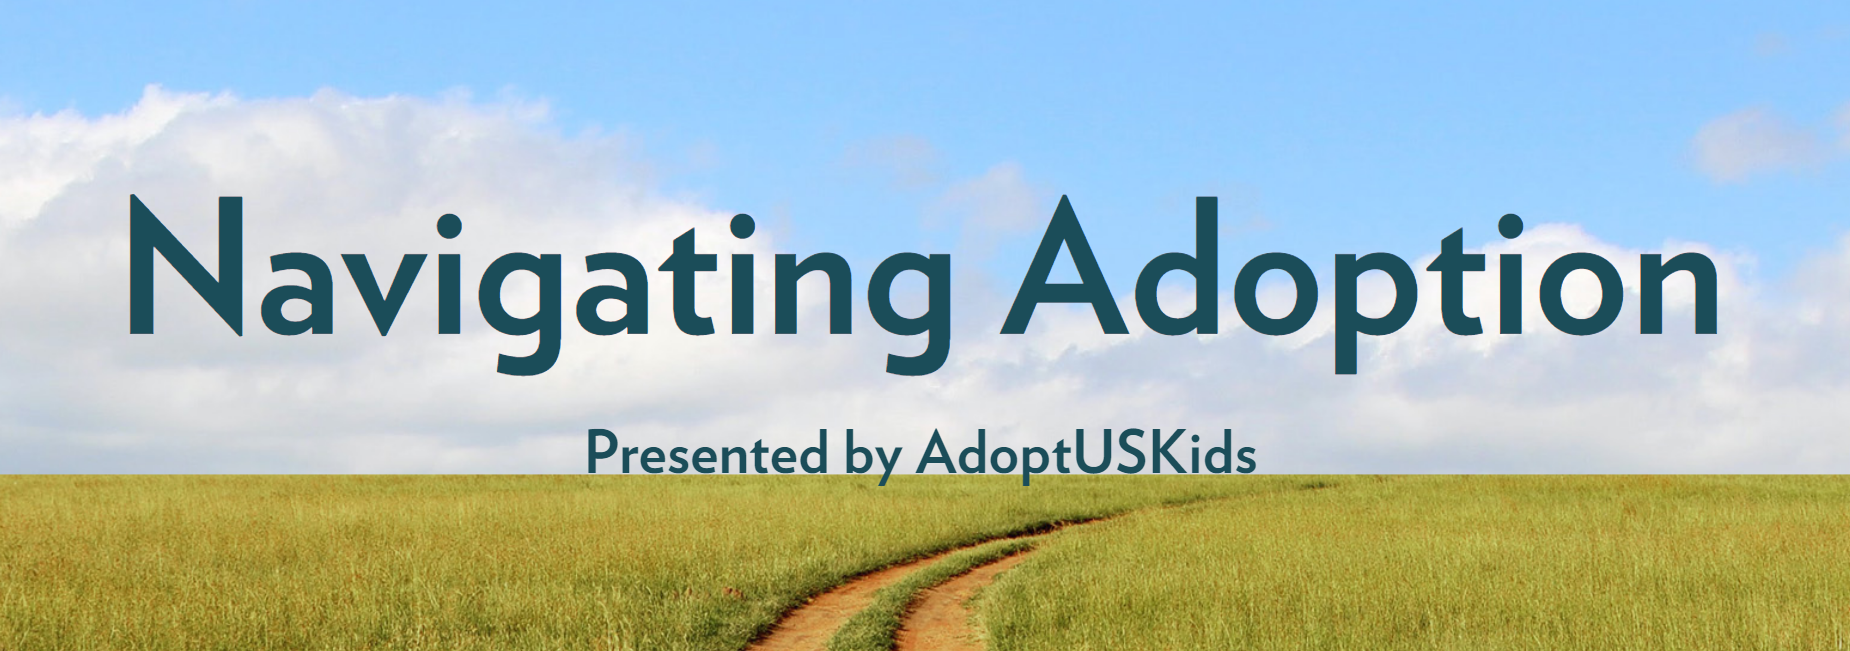 Navigating Adoption: Presented by AdoptUSKids podcast Produced by Wordsworth + Booth Aims to Drive the Adoption of Teens from Foster Care 